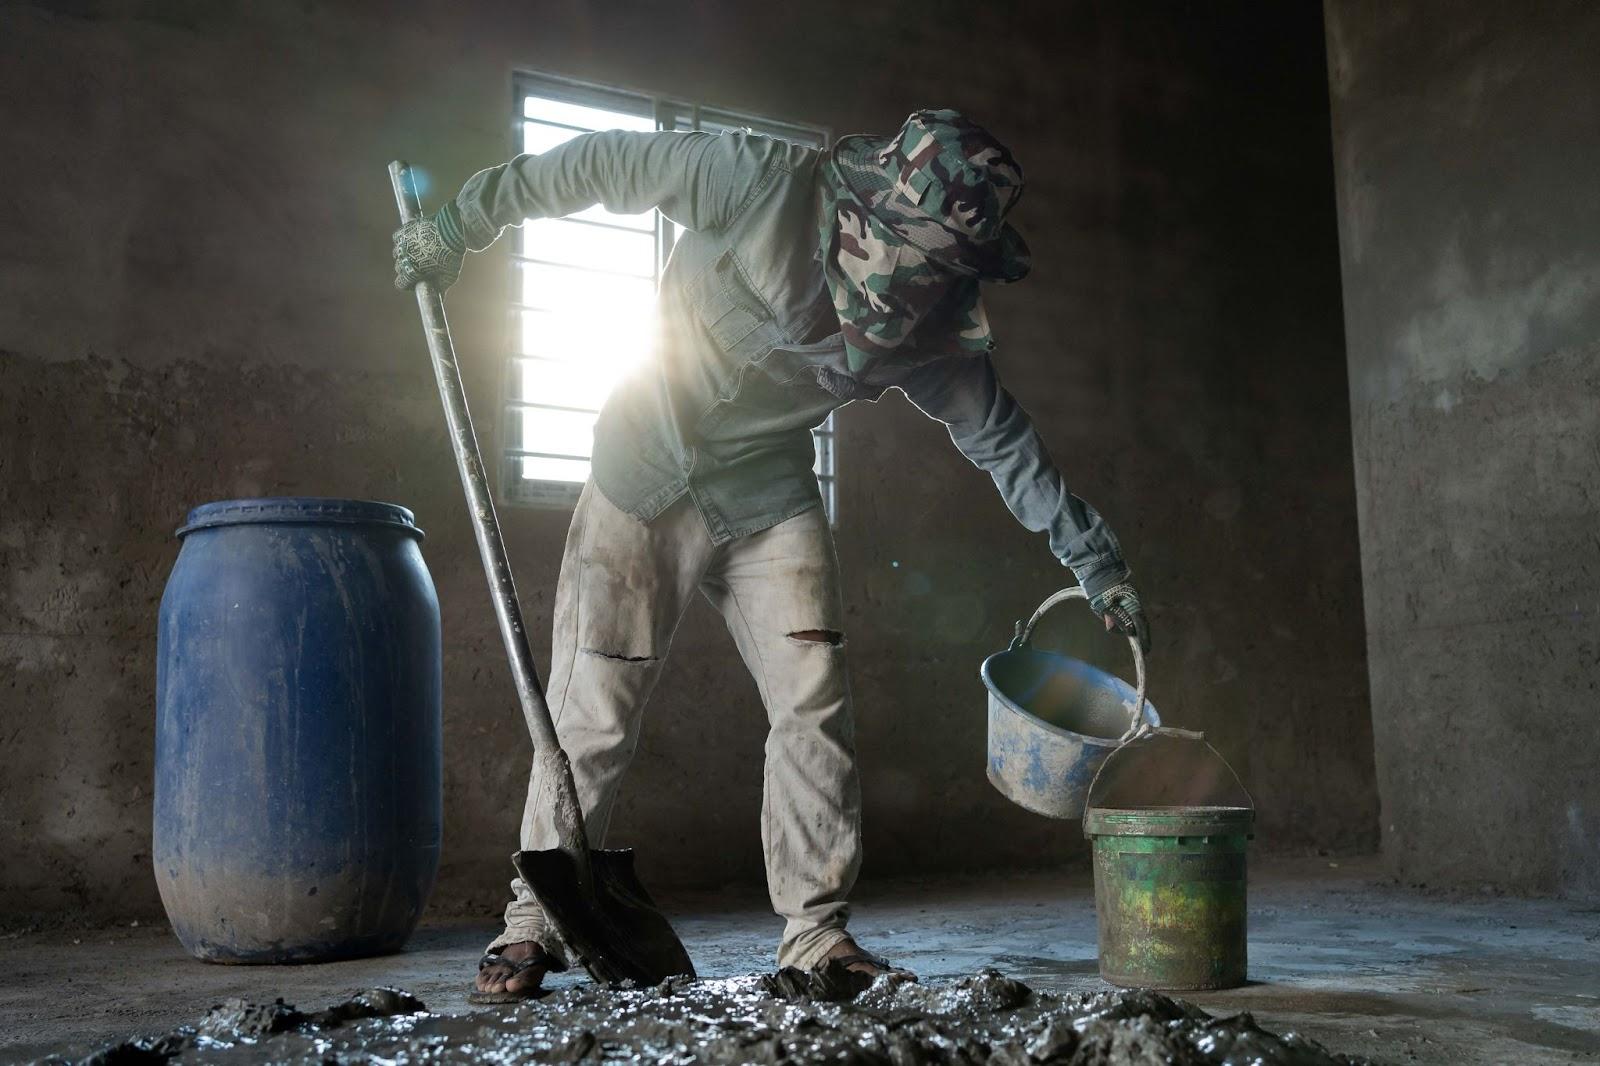 Construction worker Dieb Phearum mixes cement at a construction site on the outskirts of Phnom Penh in Kambol District. (Andy Ball)